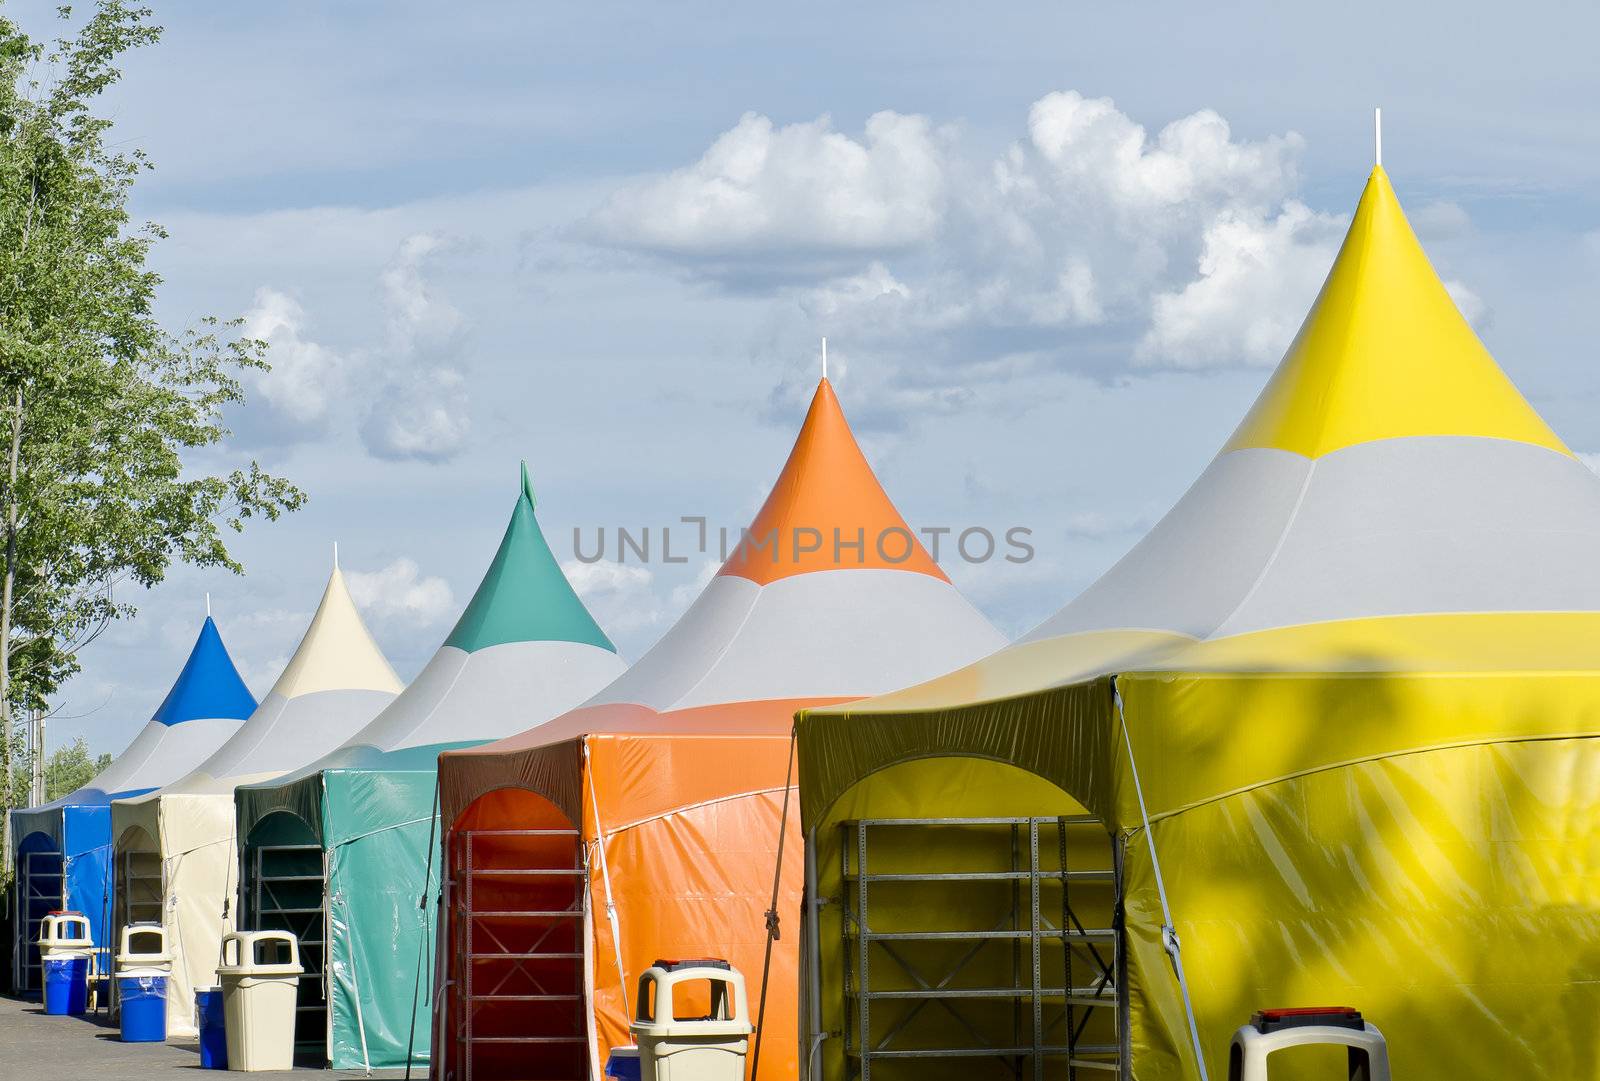 Five colorful carnival tents against a blue cloudy sky.